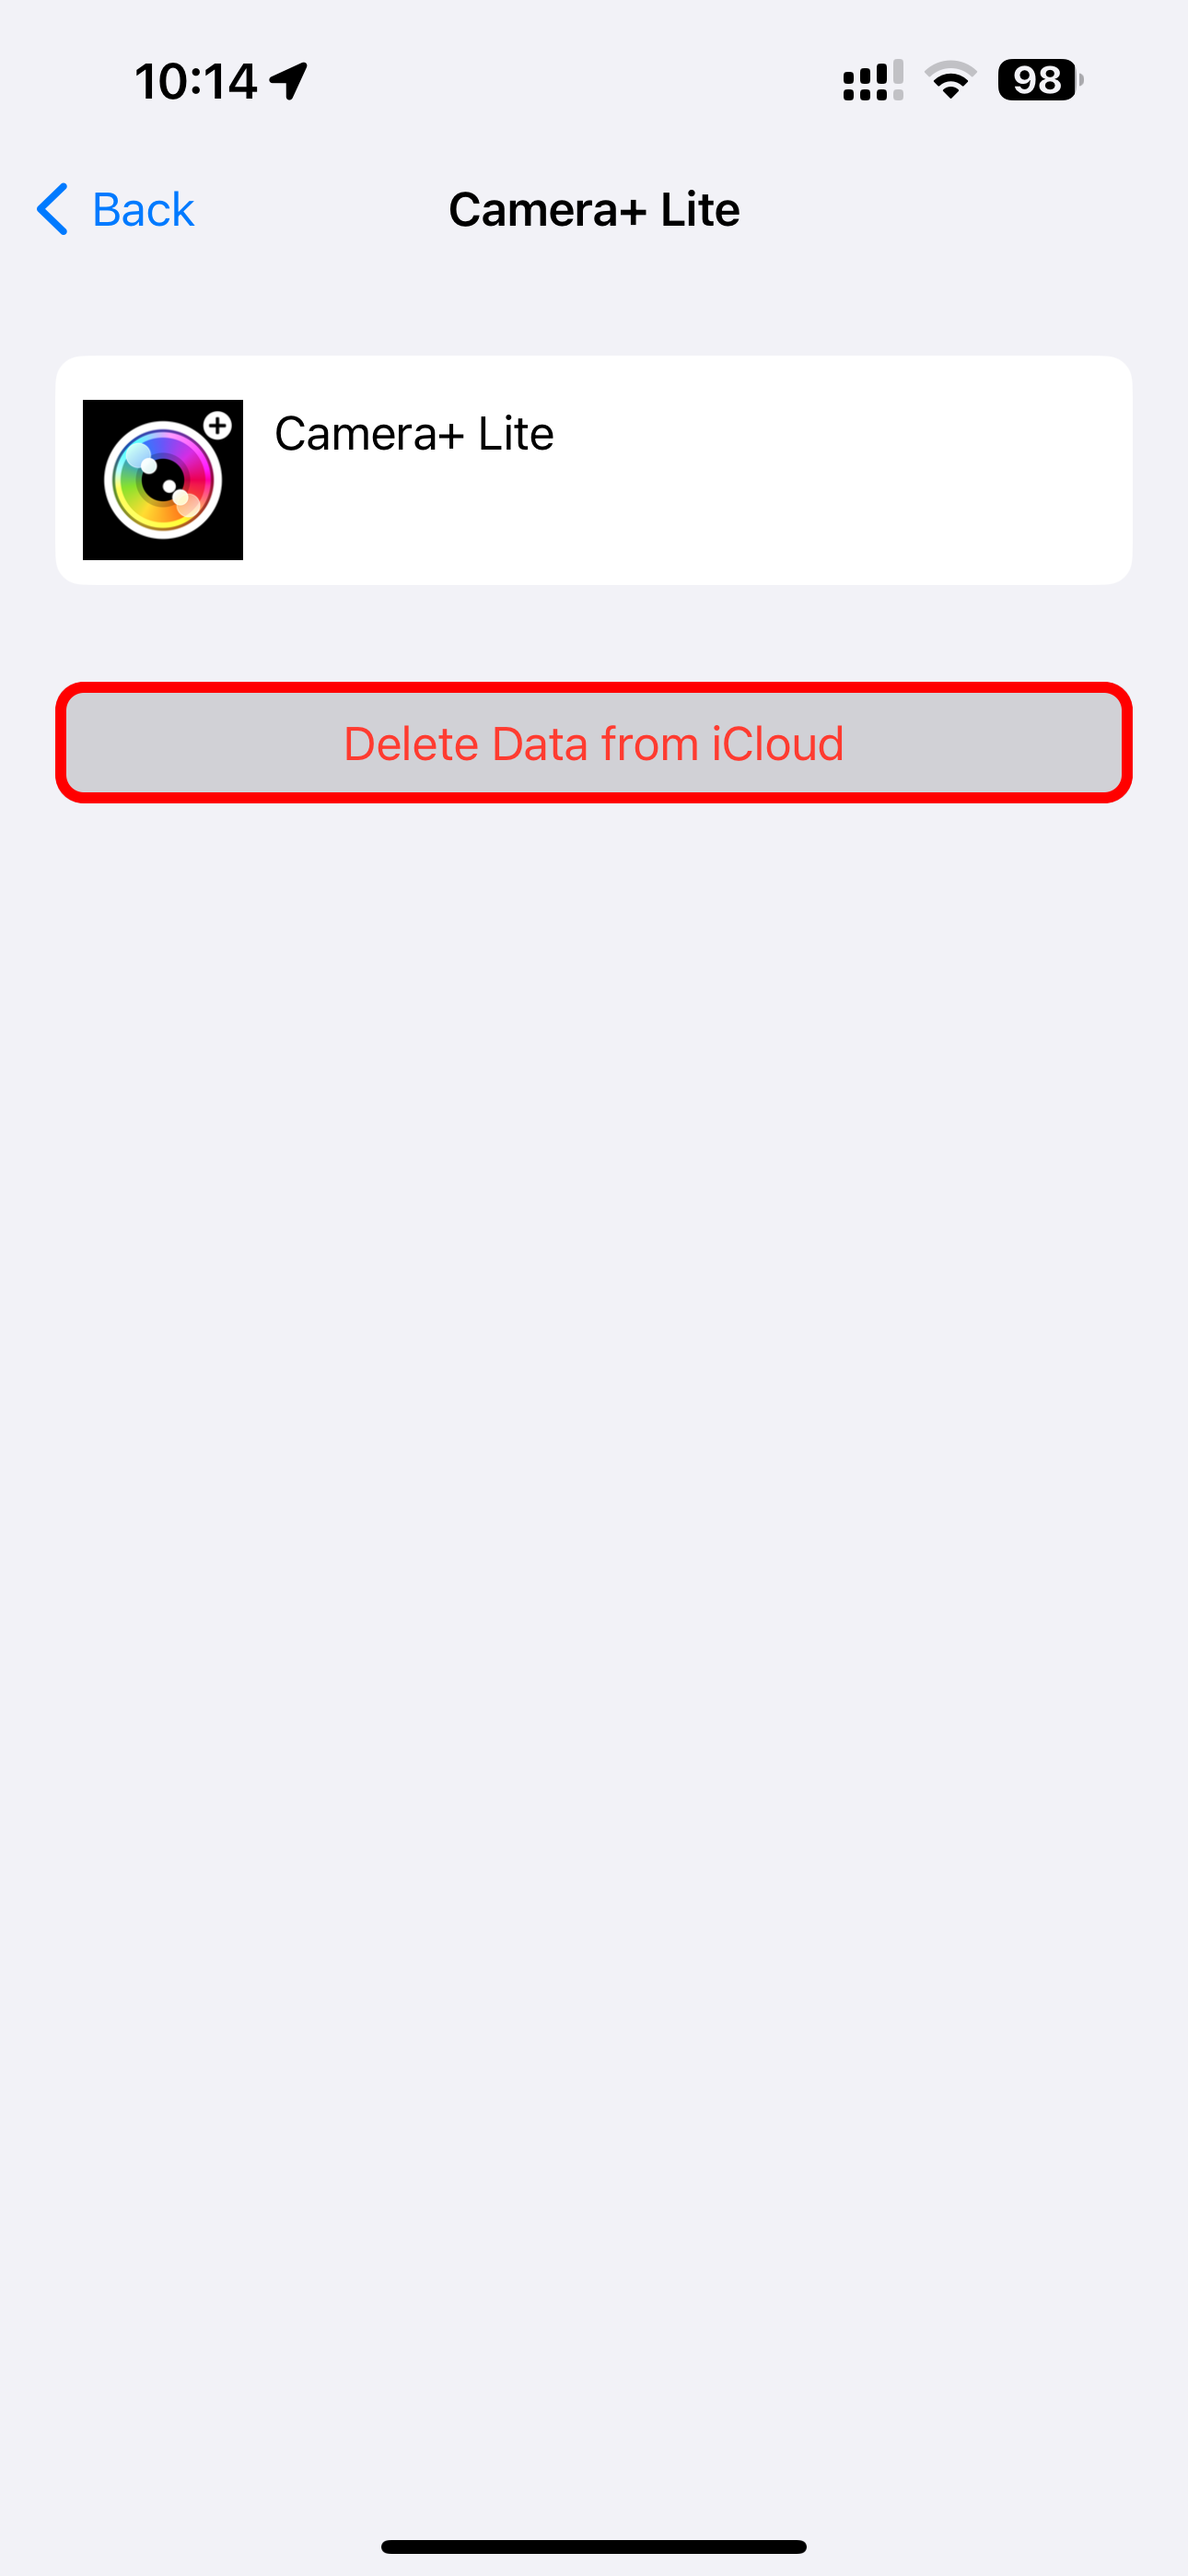 The Delete from iCloud option highlighted for the Camera+ Lite app in Settings on iPhone.